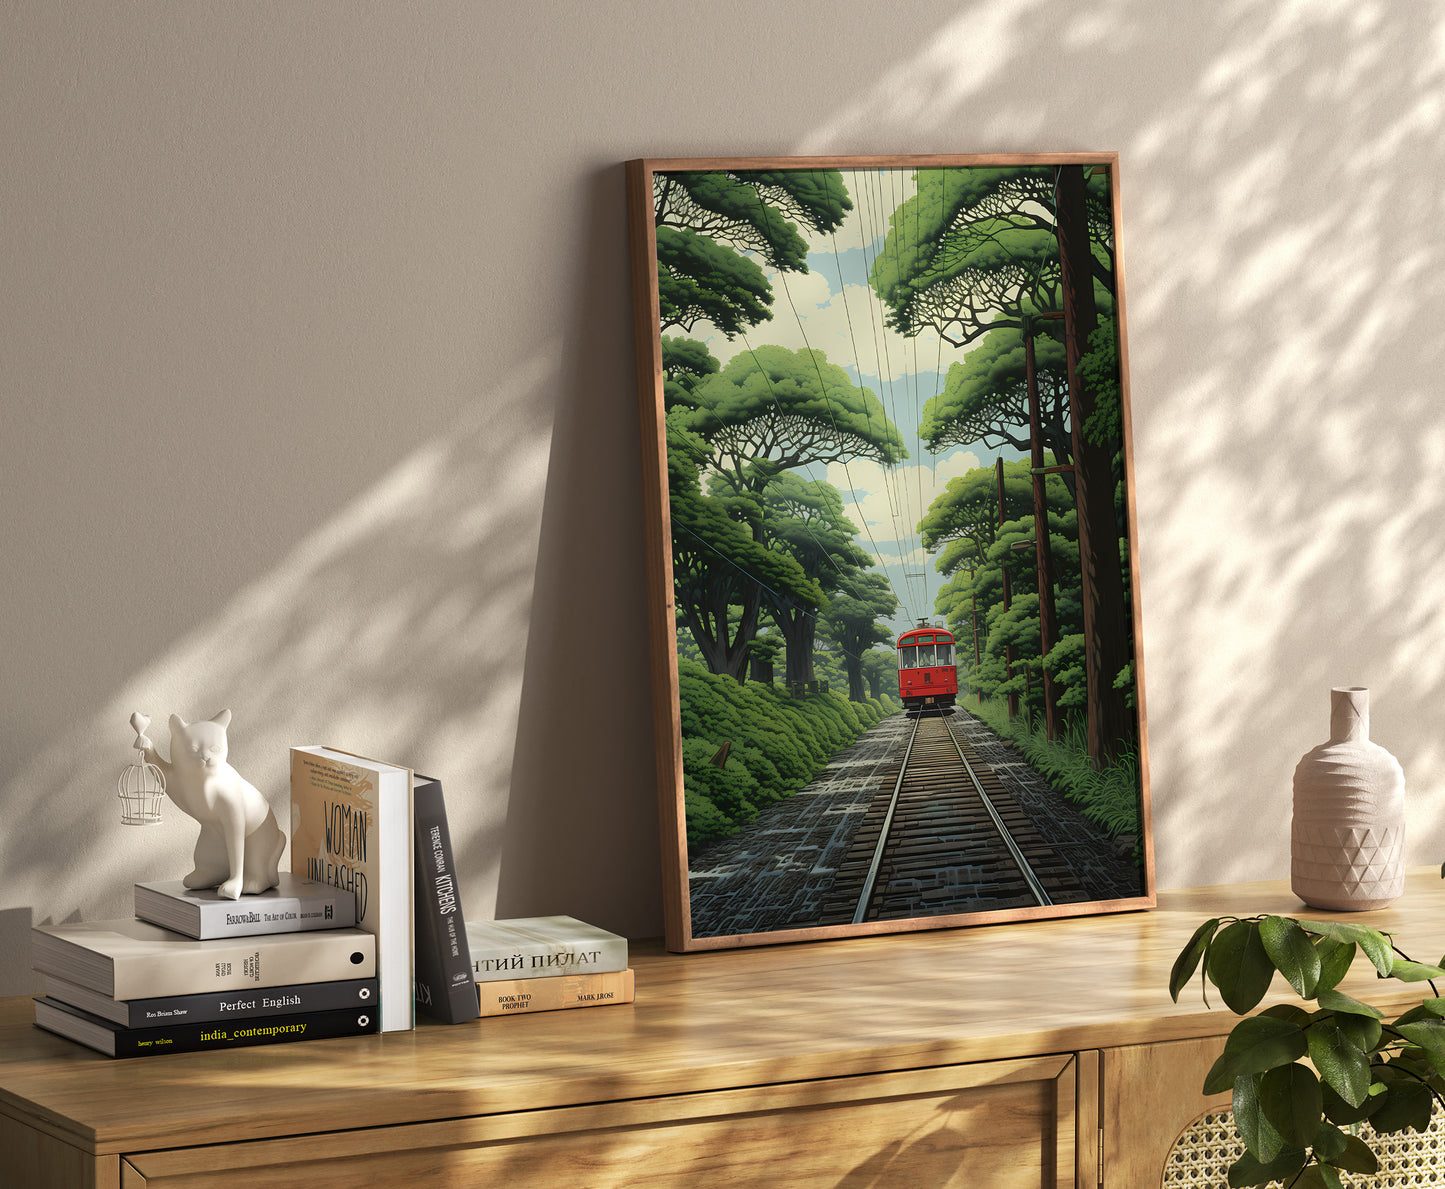 Framed artwork of a train amid greenery on a wall shelf with books and decor.